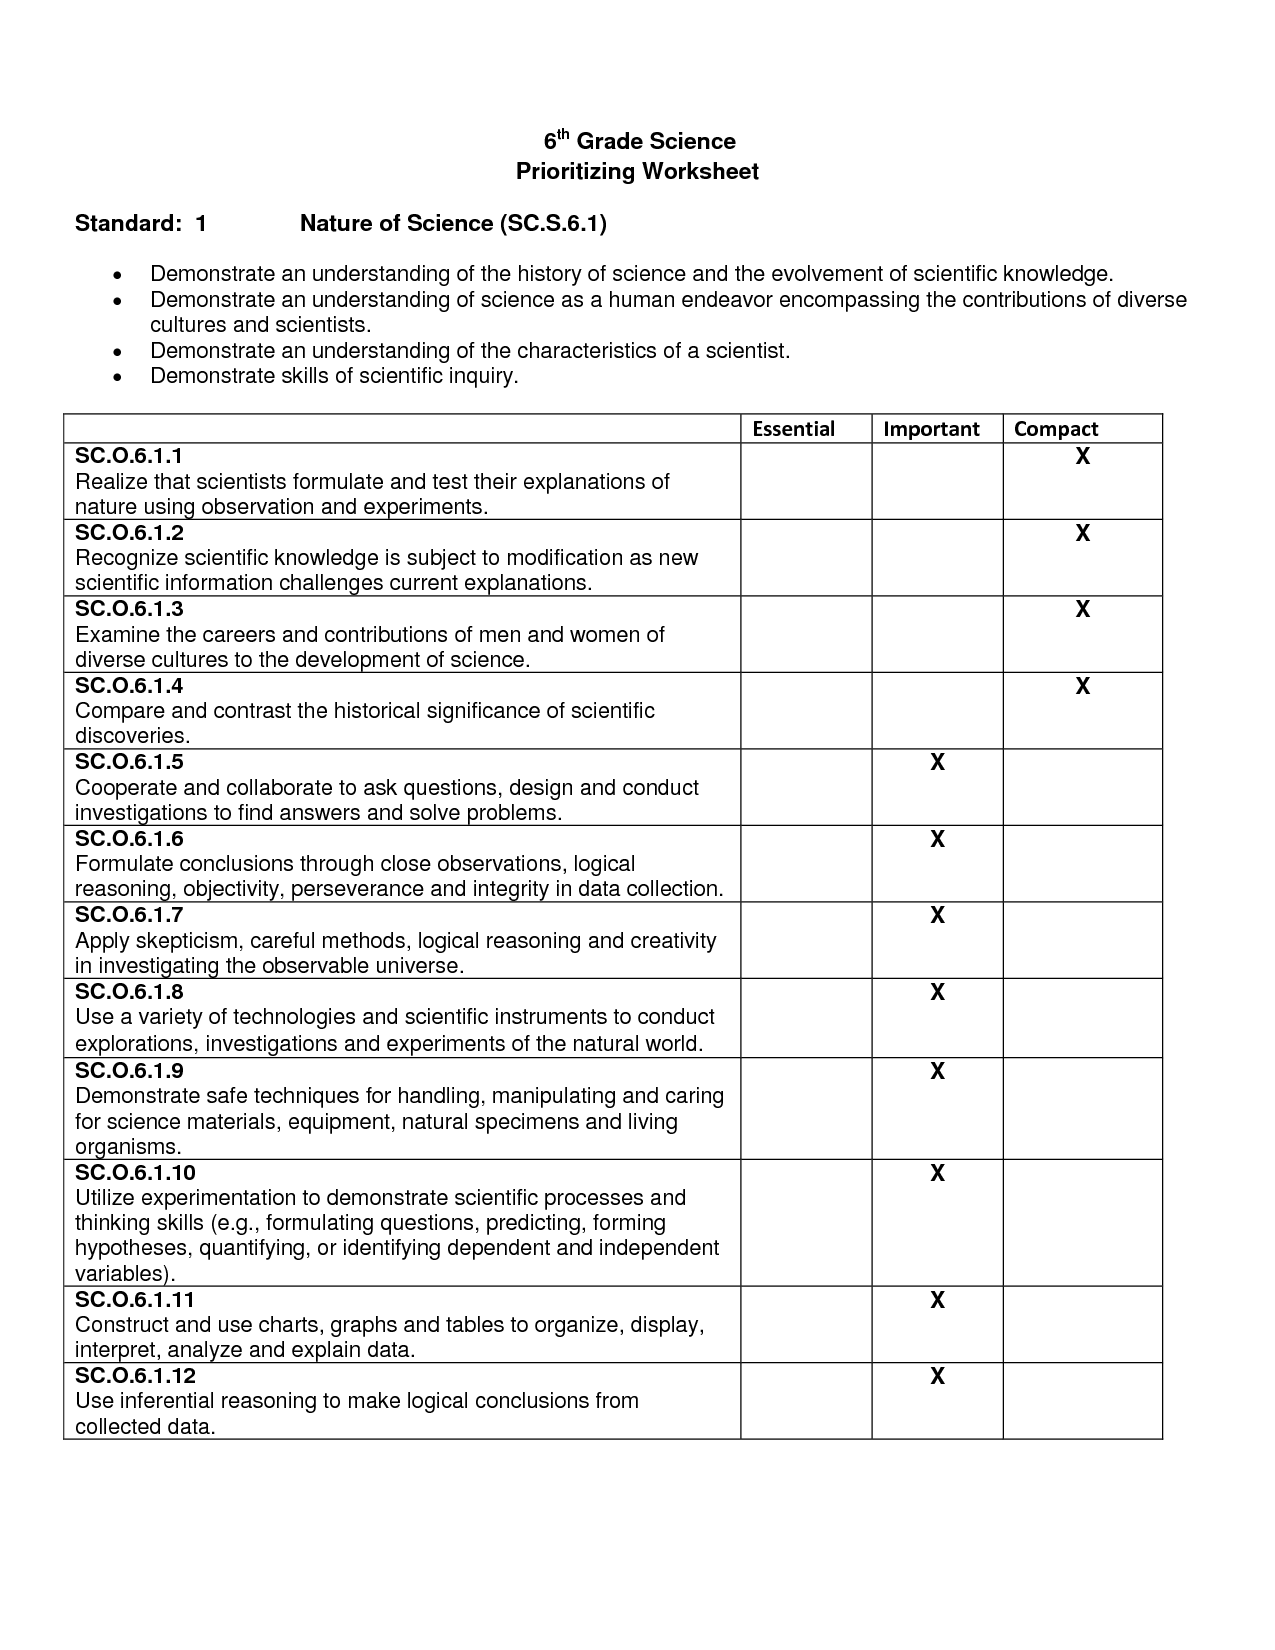 6th-grade-math-worksheets-with-answer-key-db-excel